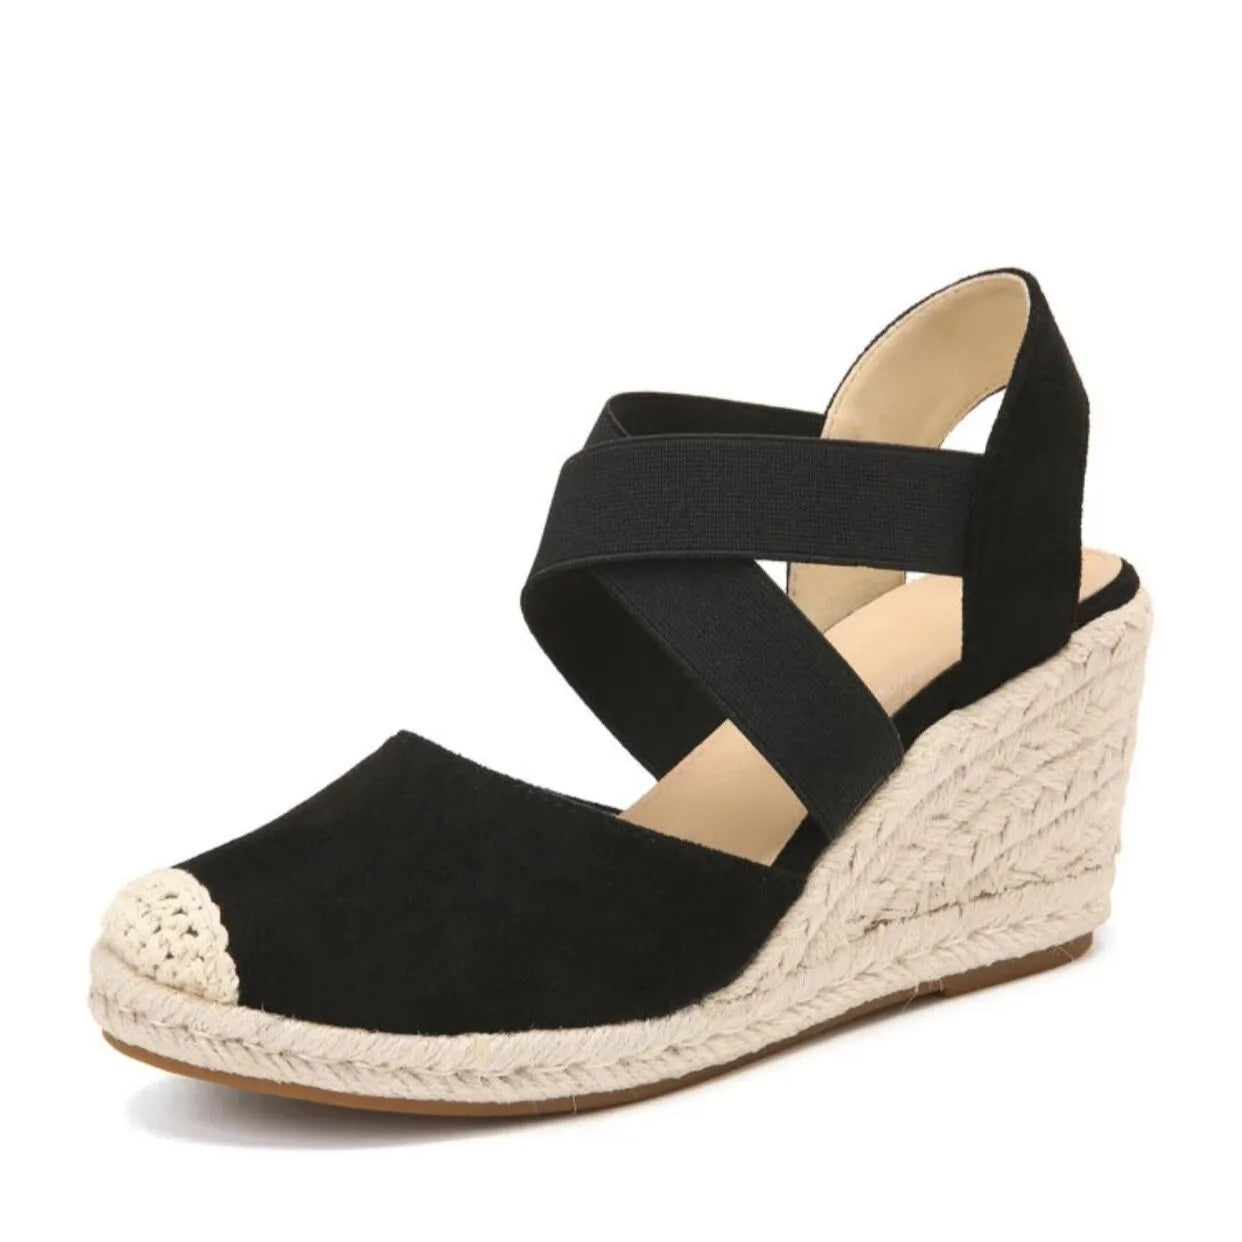 Women's Closed Toe Espadrilles Wedge Sandals, Comfortable Cross Strap Slip On Heels, Casual Outdoor Fabric Shoes